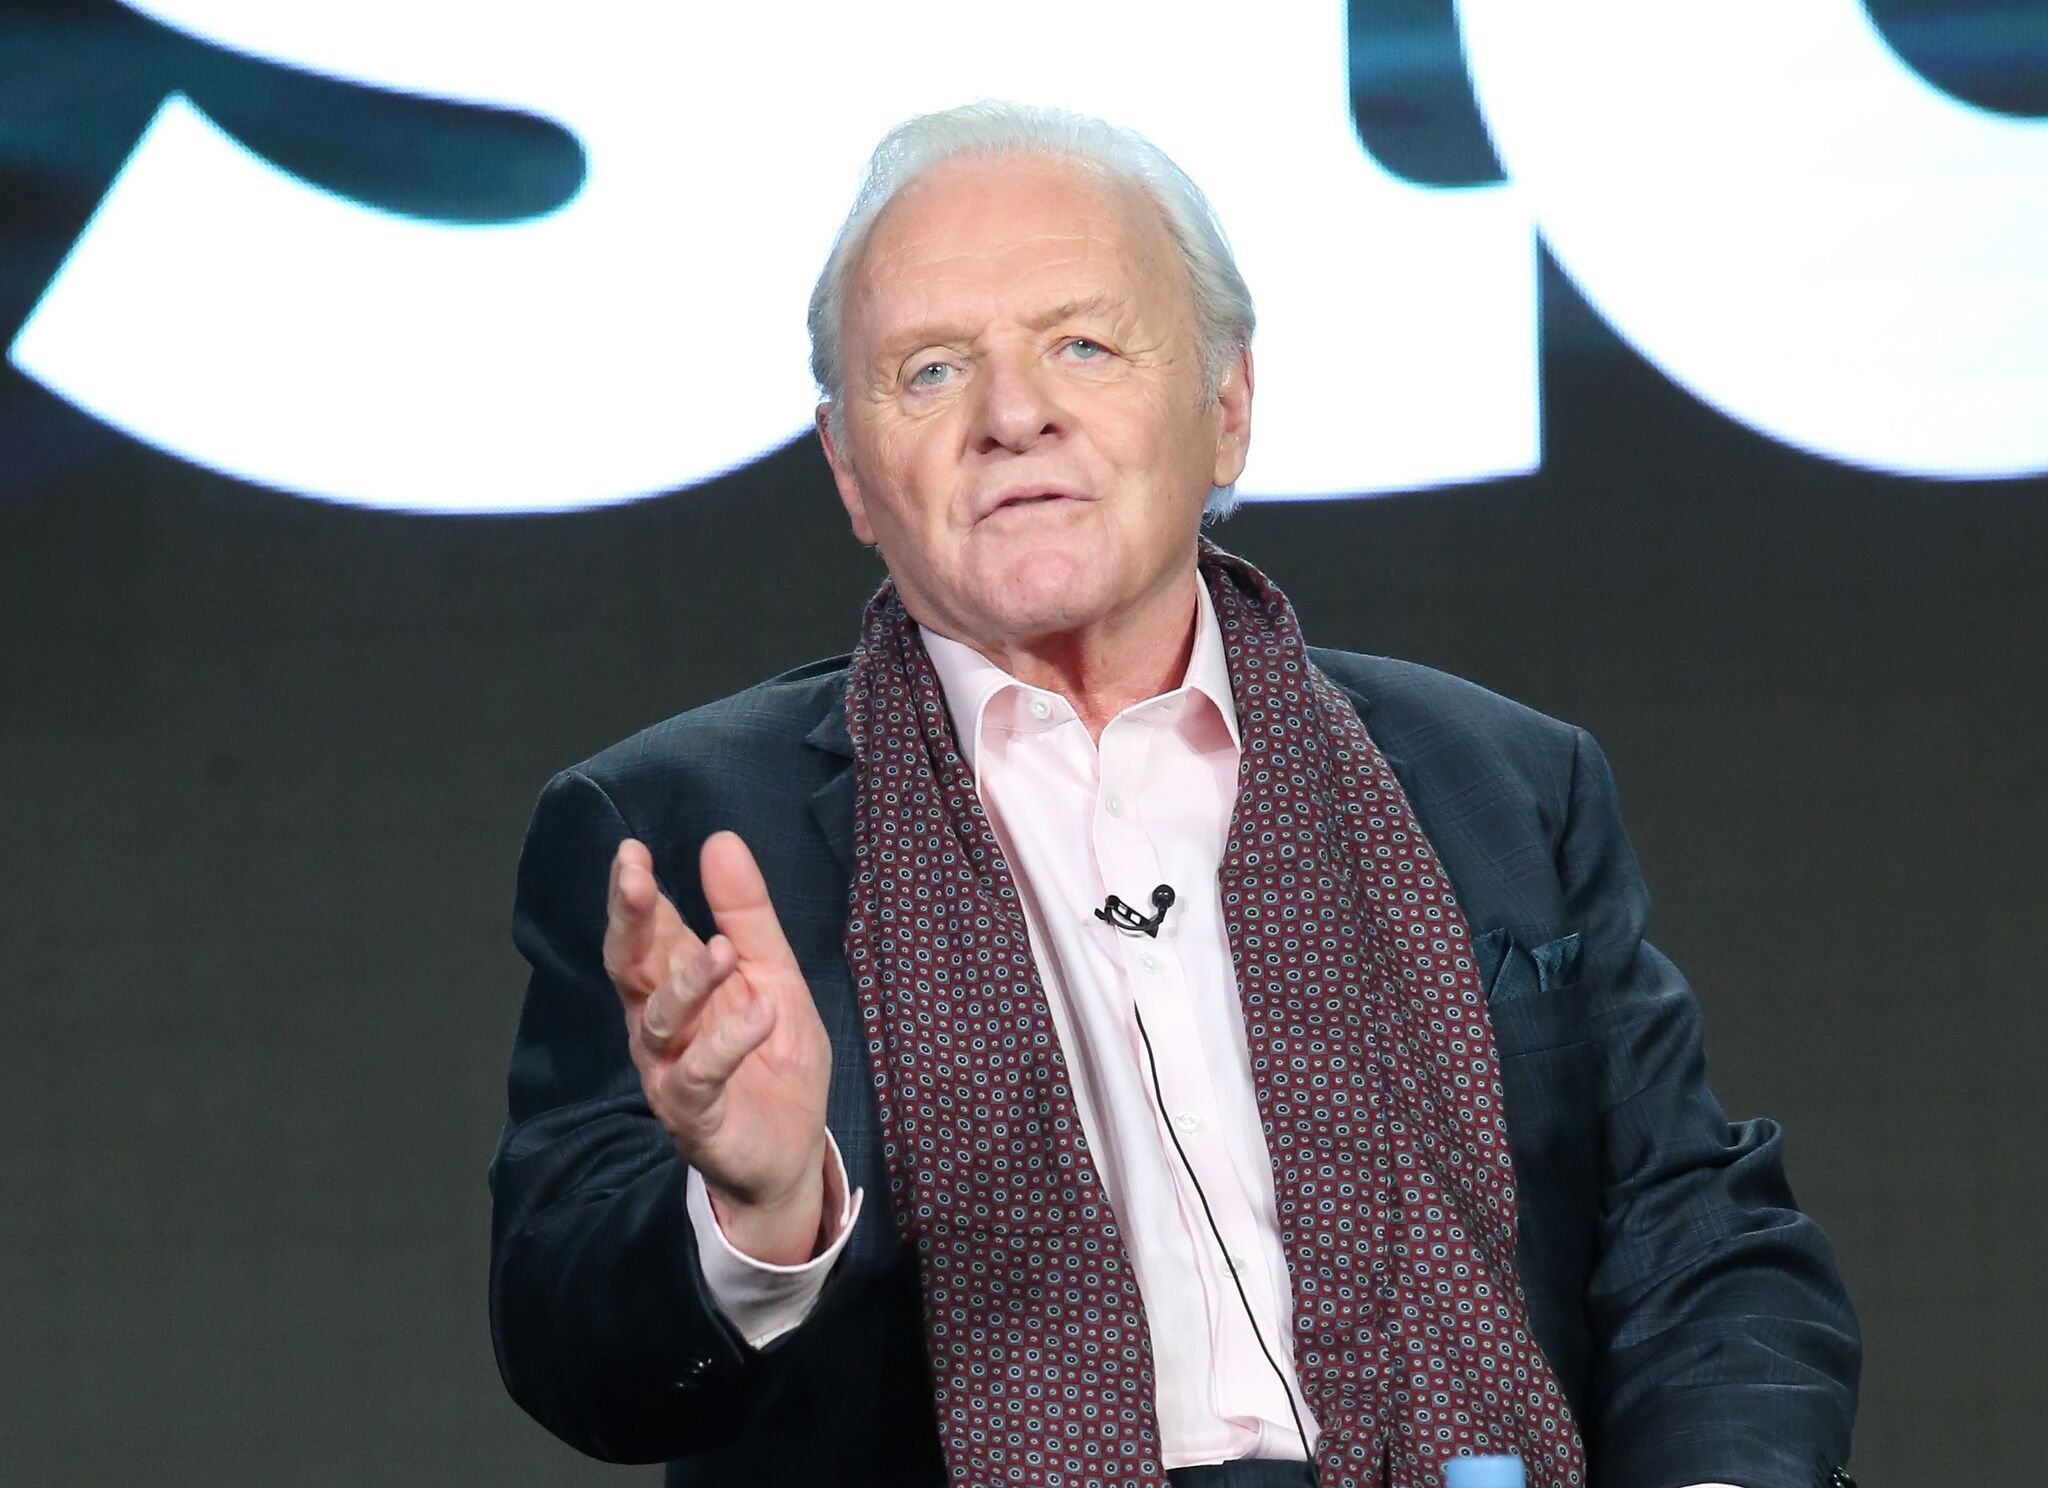 Anthony Hopkins at The Dresser panel as part of the Starz portion of This is Cable Television Critics Association Winter Tour on January 8, 2016, in Pasadena, California. | Source: Getty Images